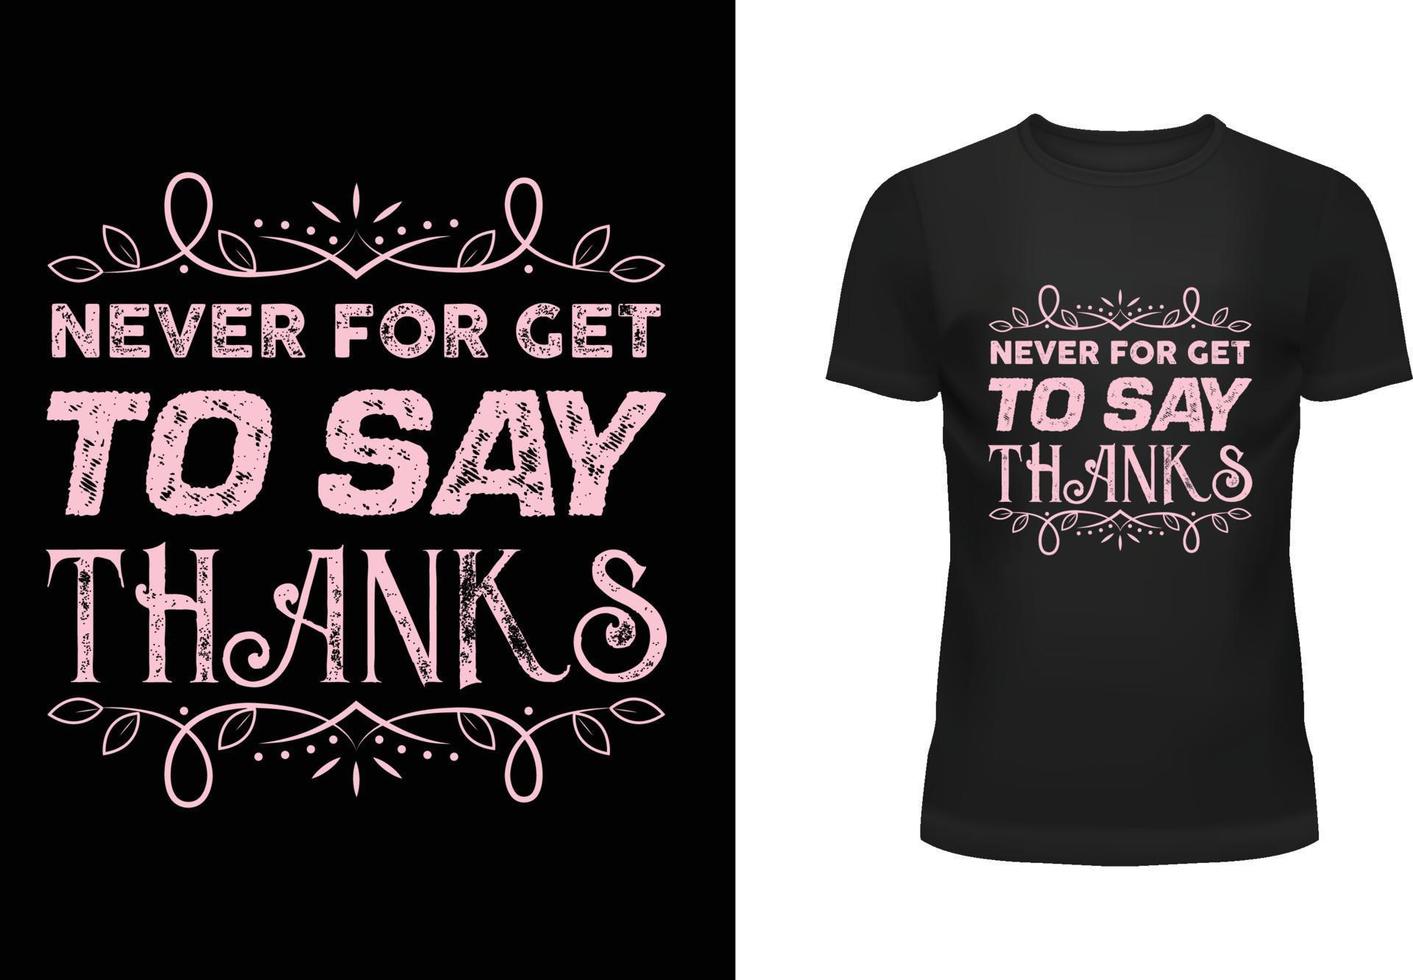 Never for get to say thanks t shirt design vector